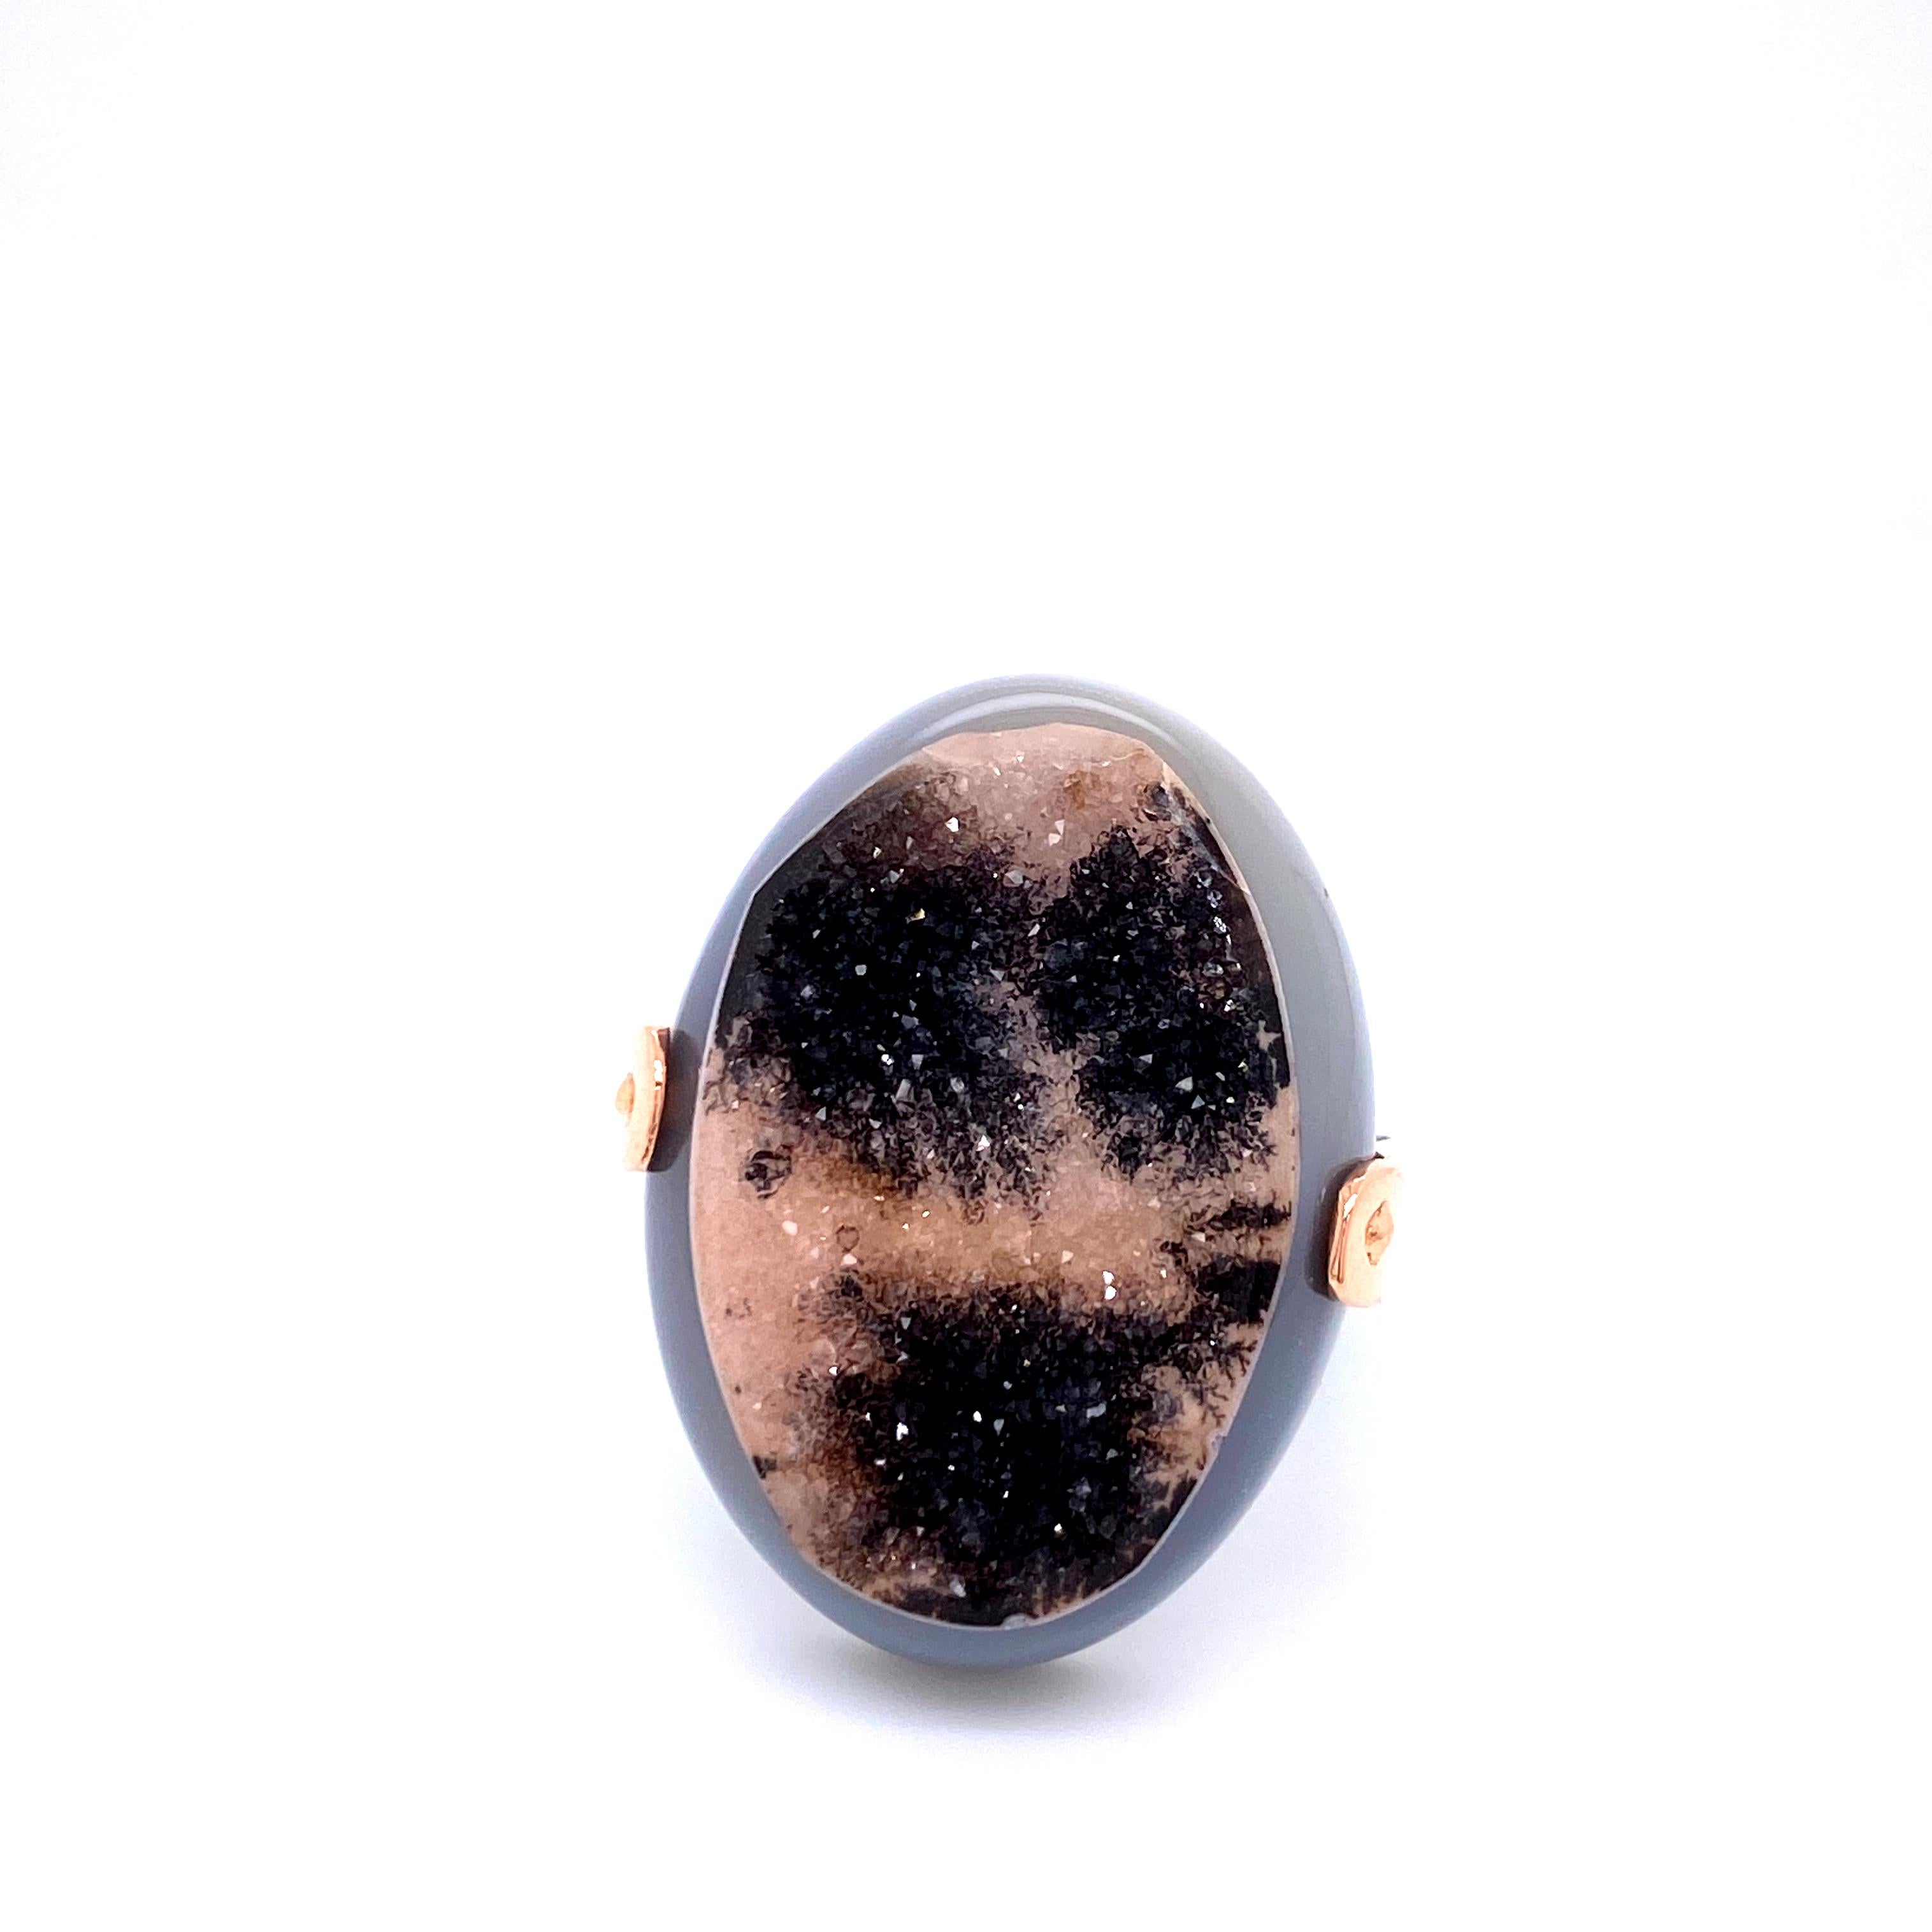 An 18k rose gold and oxidized sterling silver ring featuring one oval shaped druzy quartz- black and grey.Ring size 9.5. This ring was custom designed and made by llyn strong.